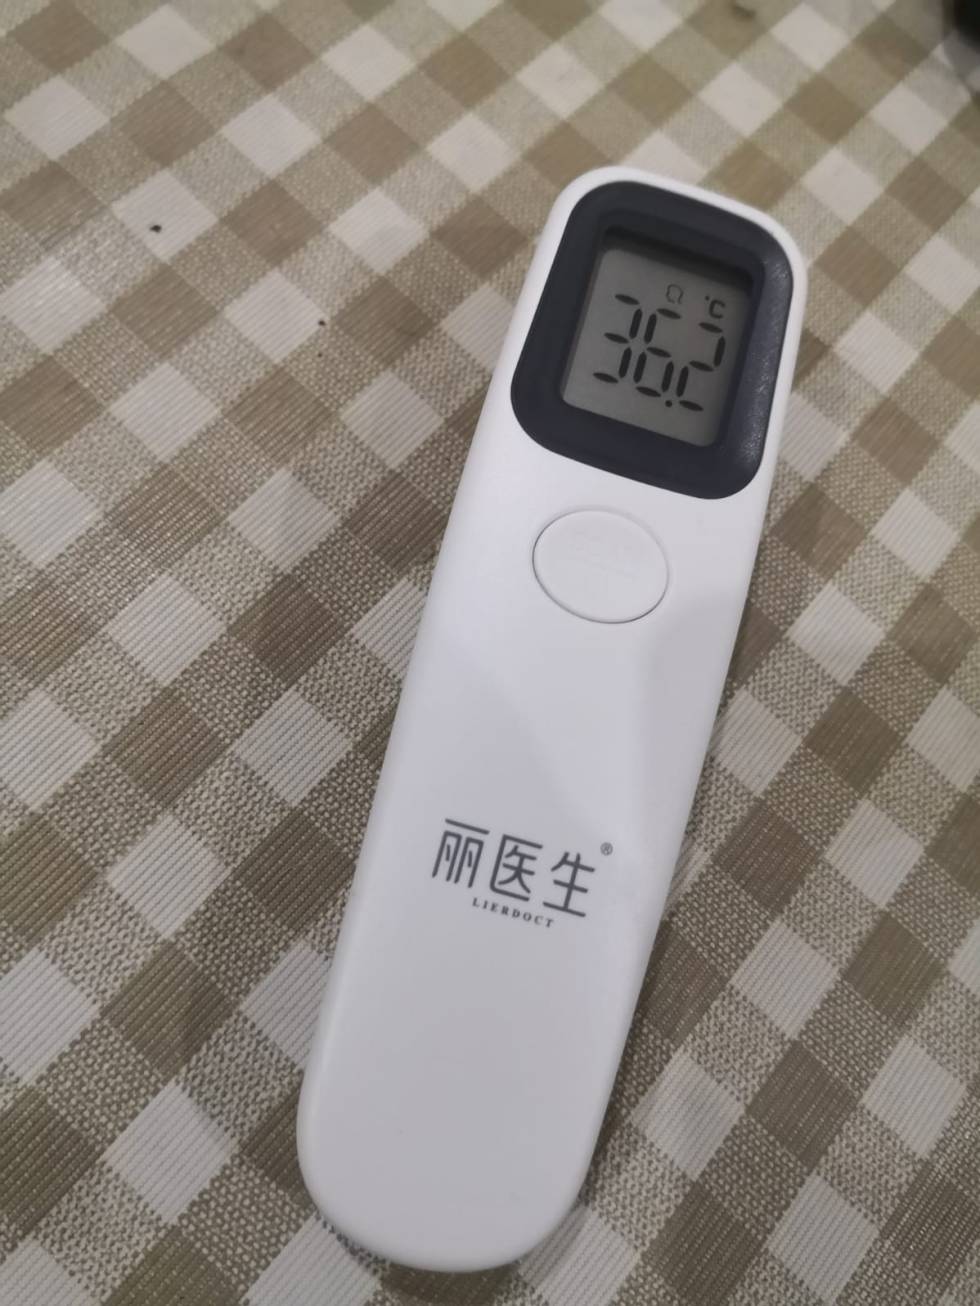 The thermometer of the sisters He.